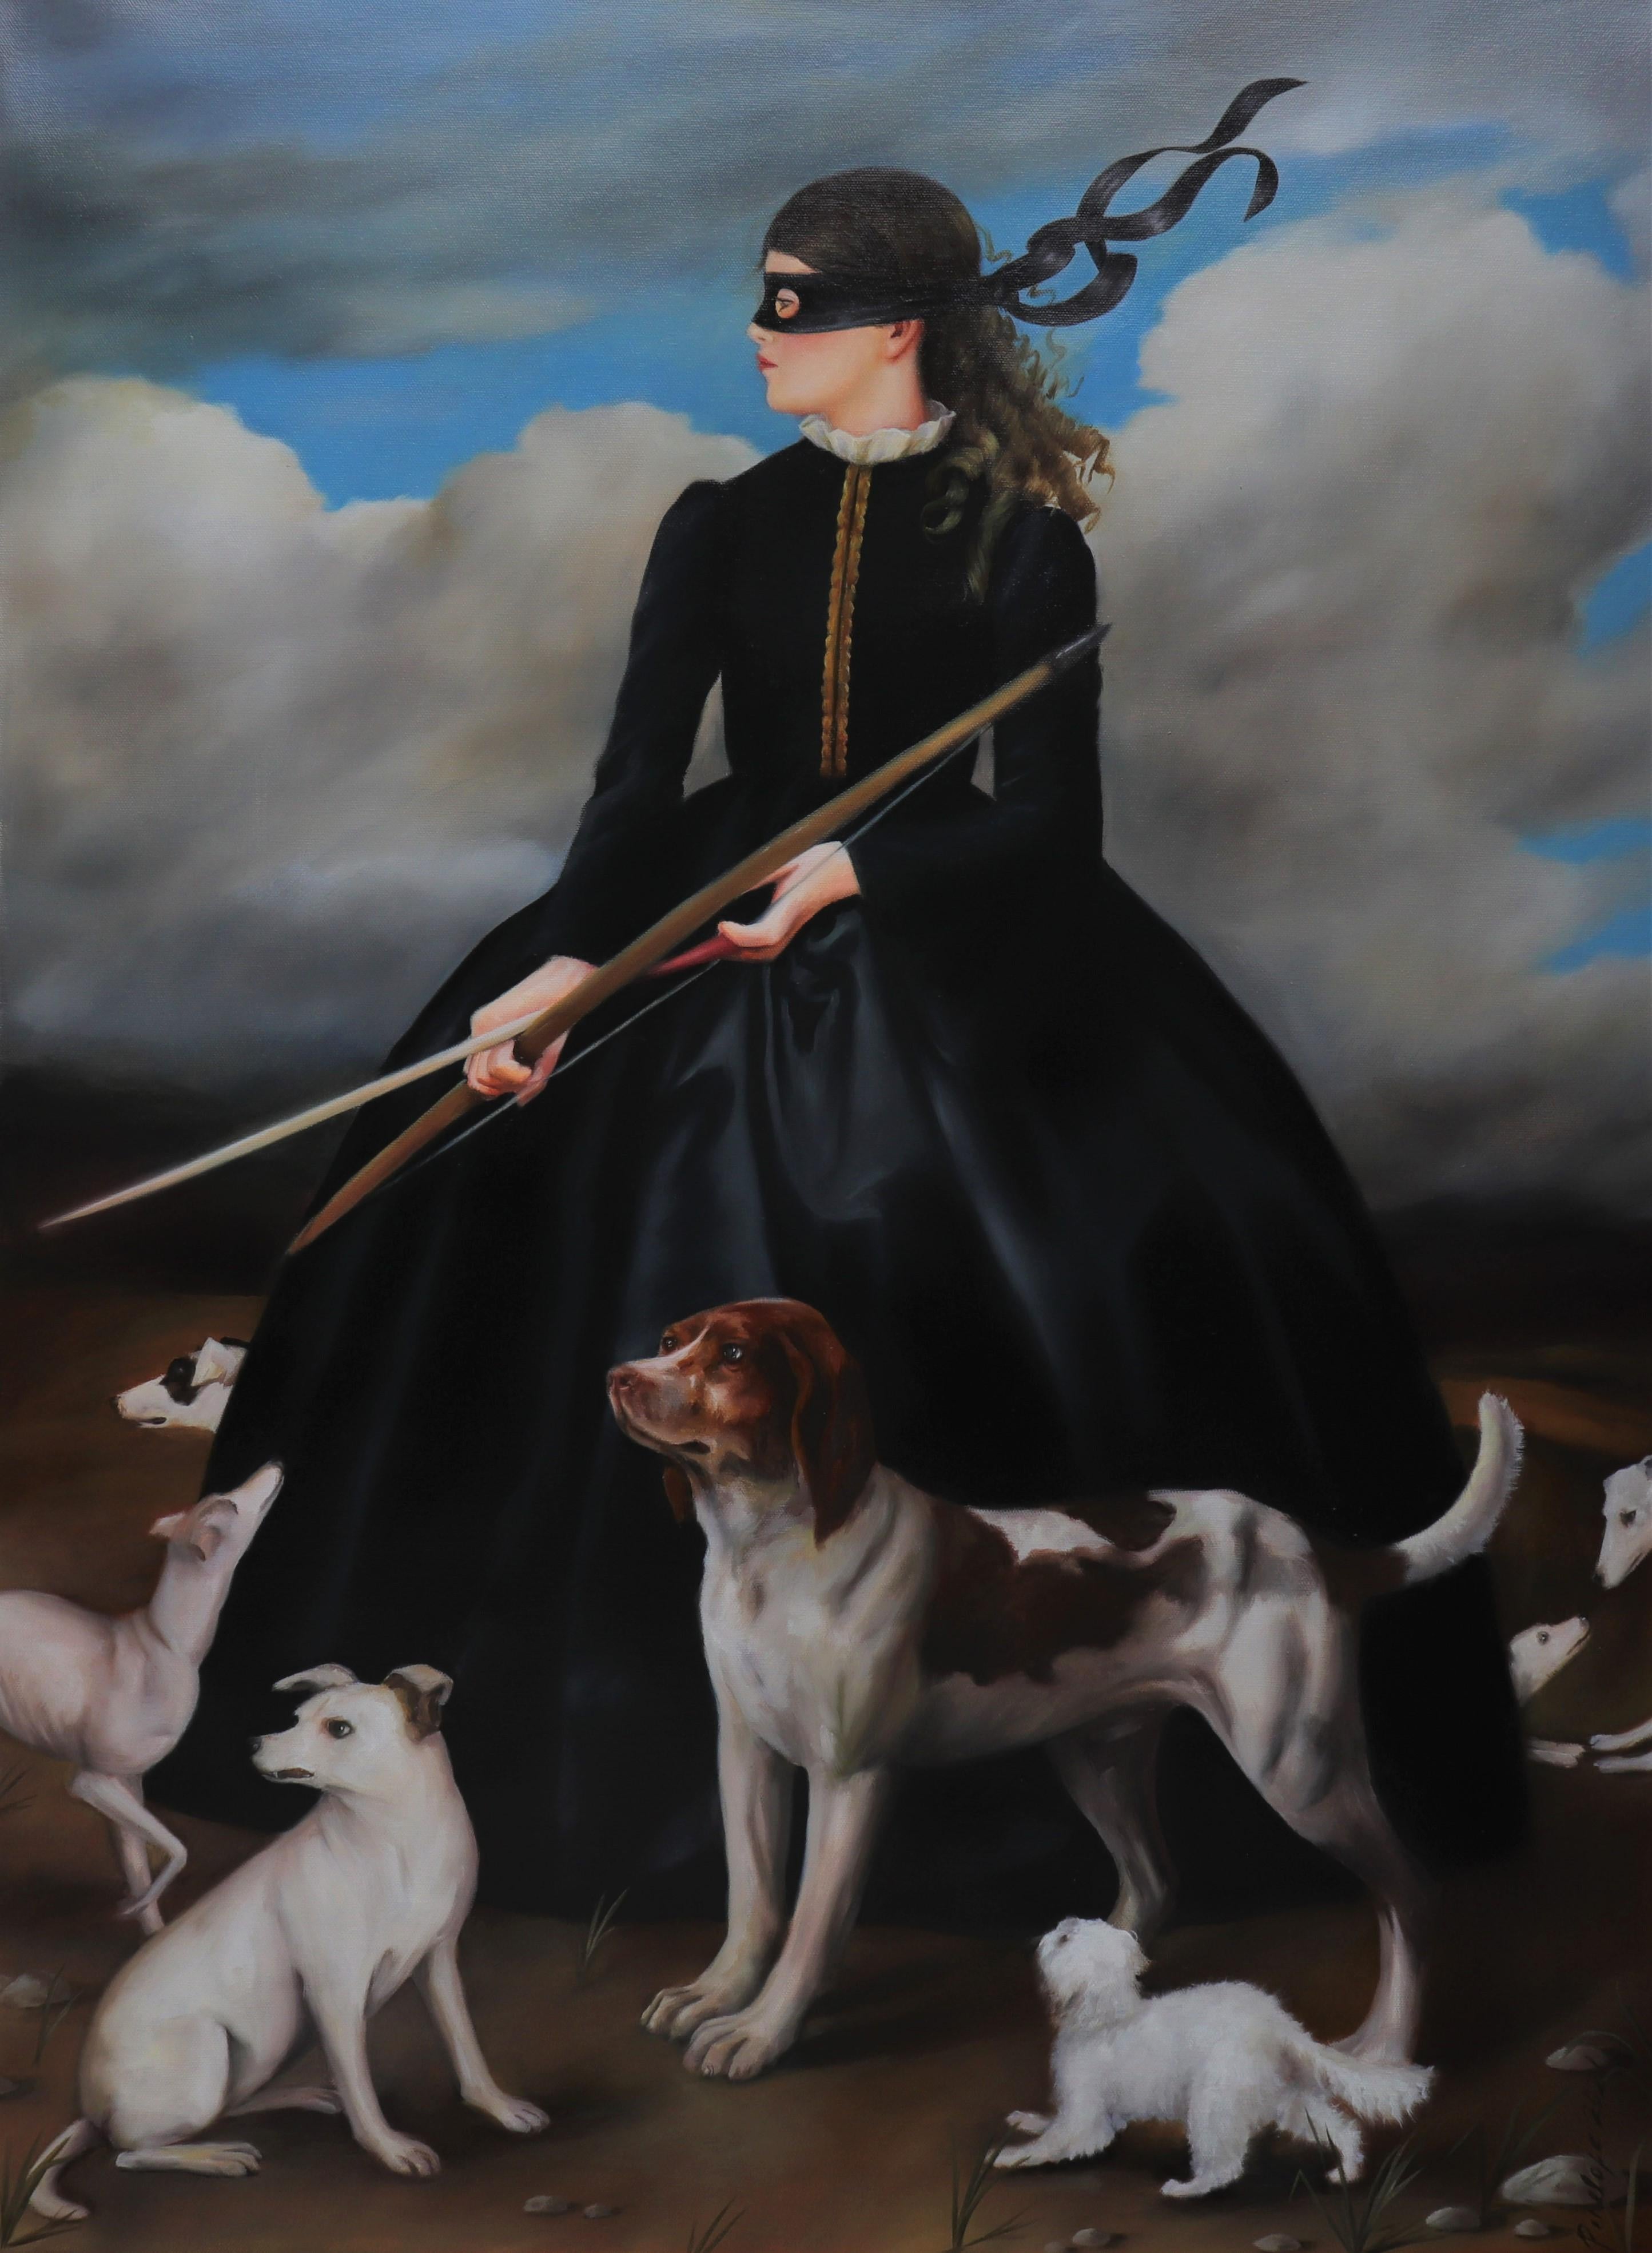 Penelope Boyd Portrait Painting - Rescues - Masked Girl in a Old World Black Dress with Dogs in a Cloudy Landscape